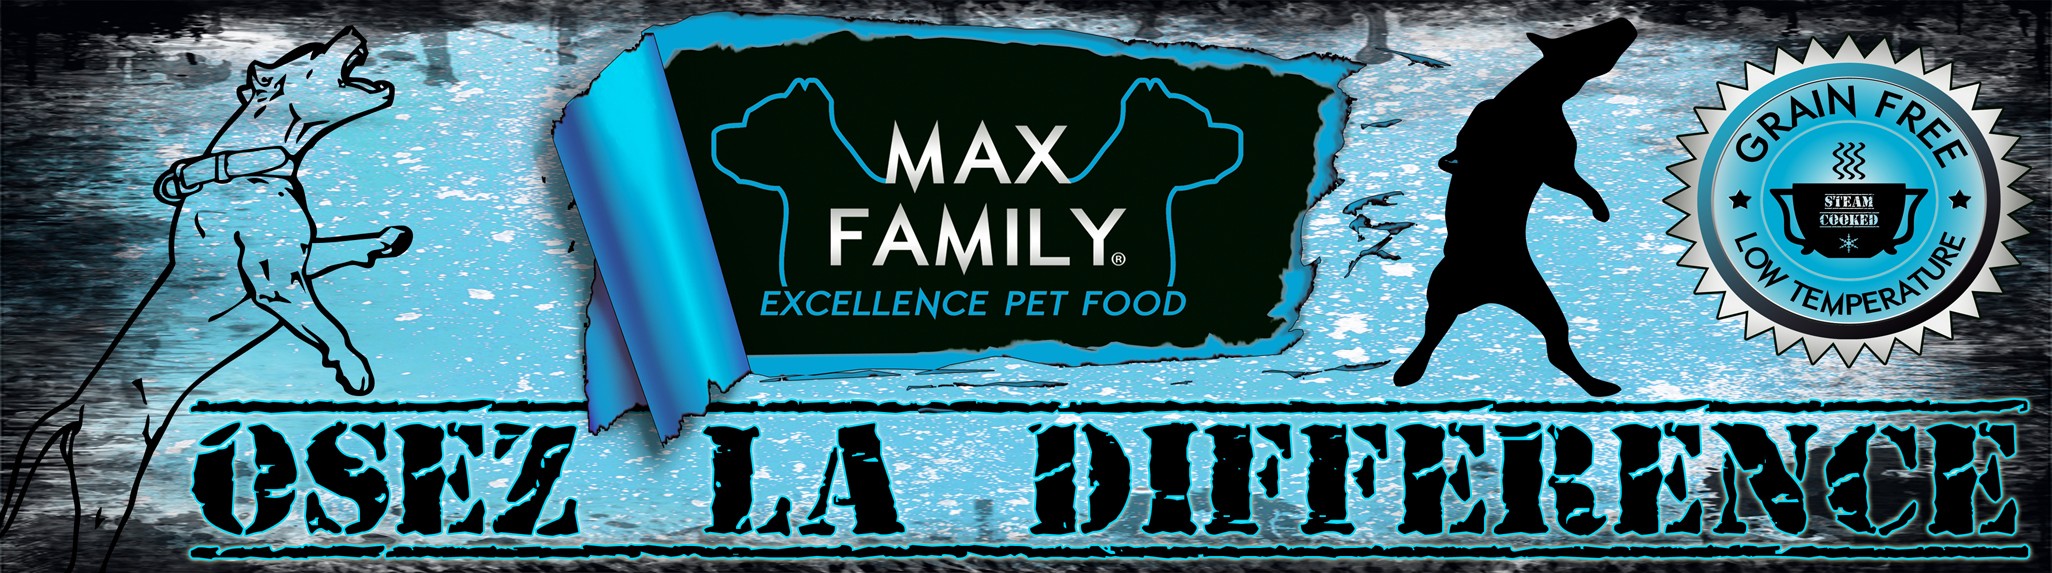 OSEZ LA DIFFERENCE - MAX FAMILY